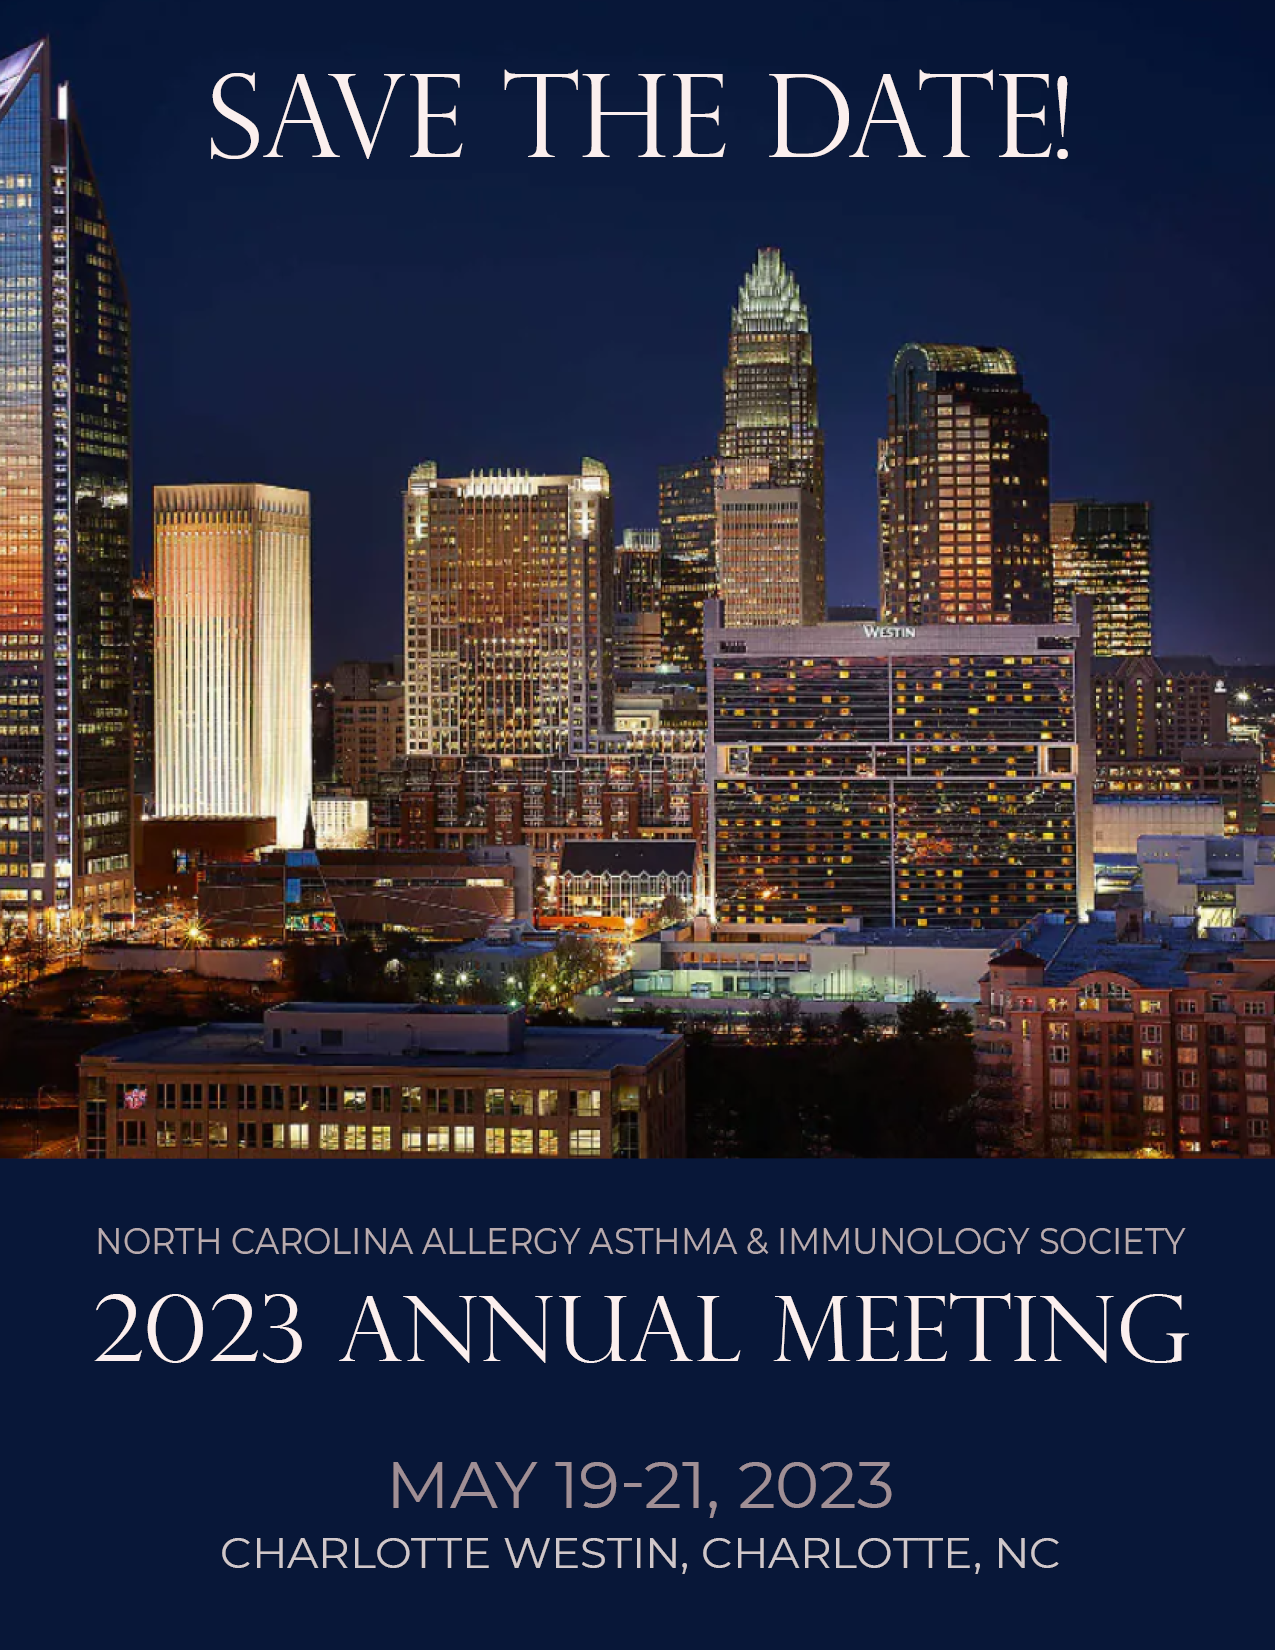 Save the Date for the 2023 NCAAIS Annual Meeting